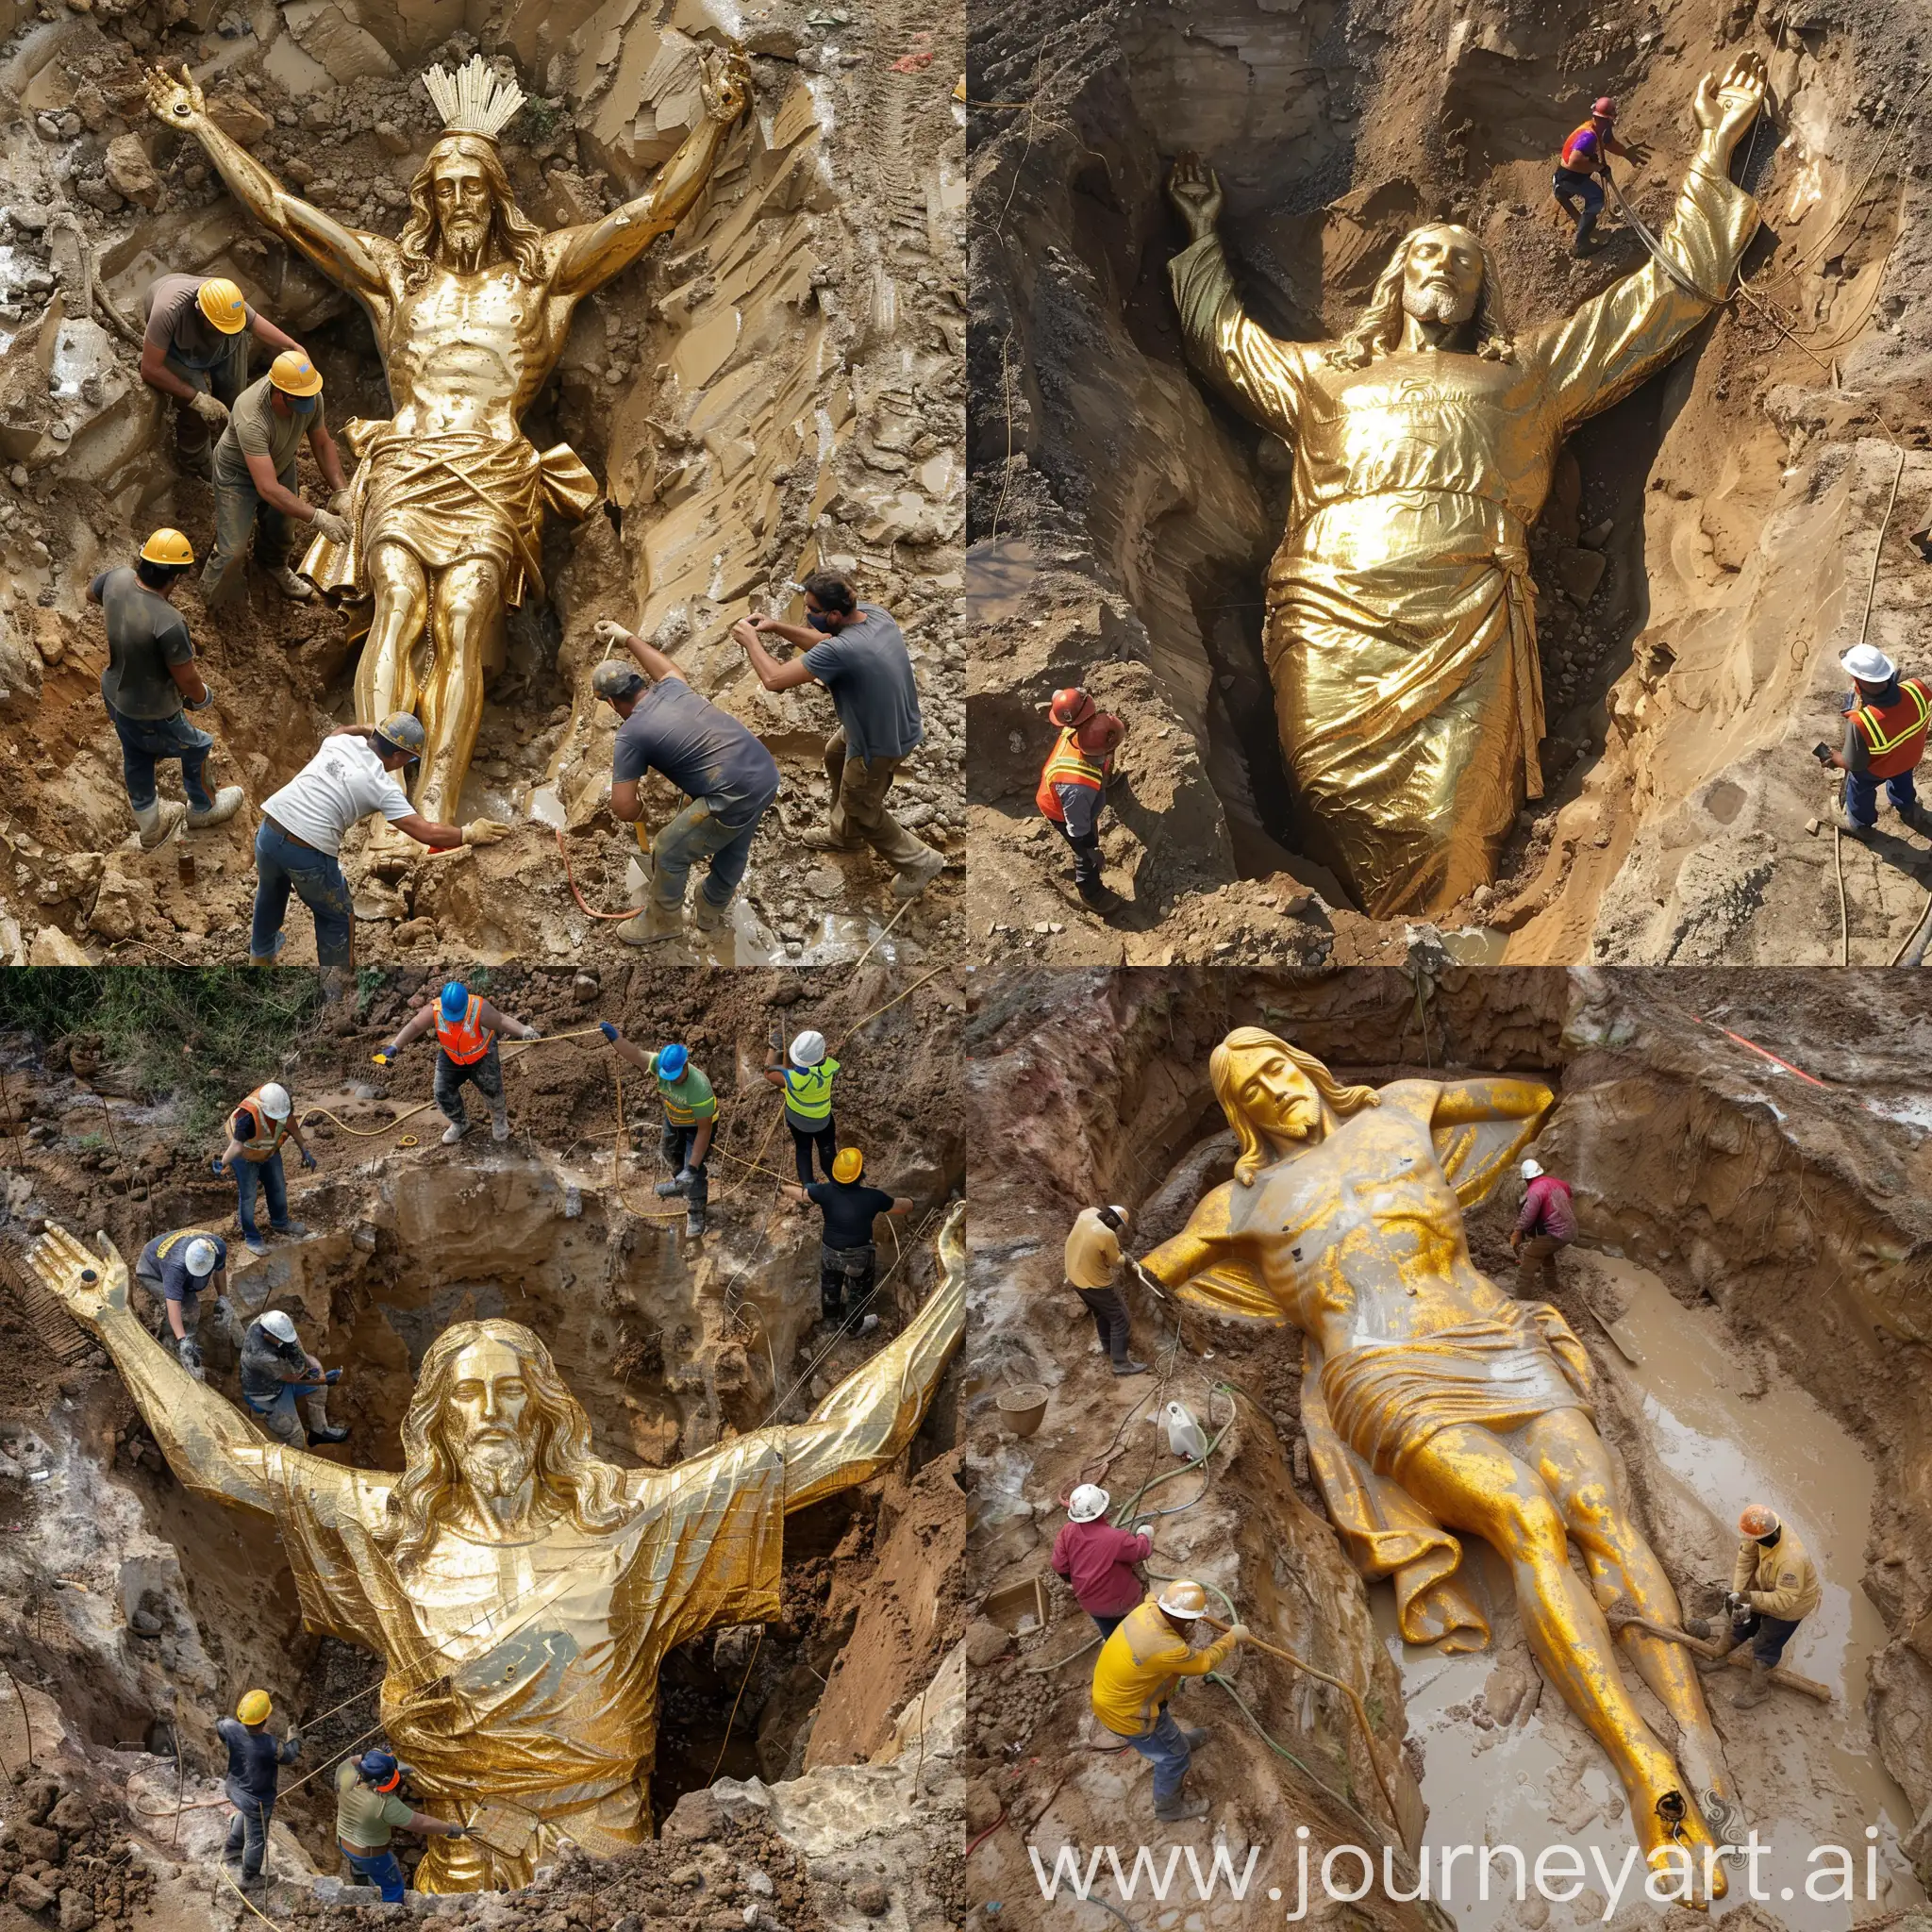 Workers-Digging-Out-a-Massive-Golden-Jesus-Statue